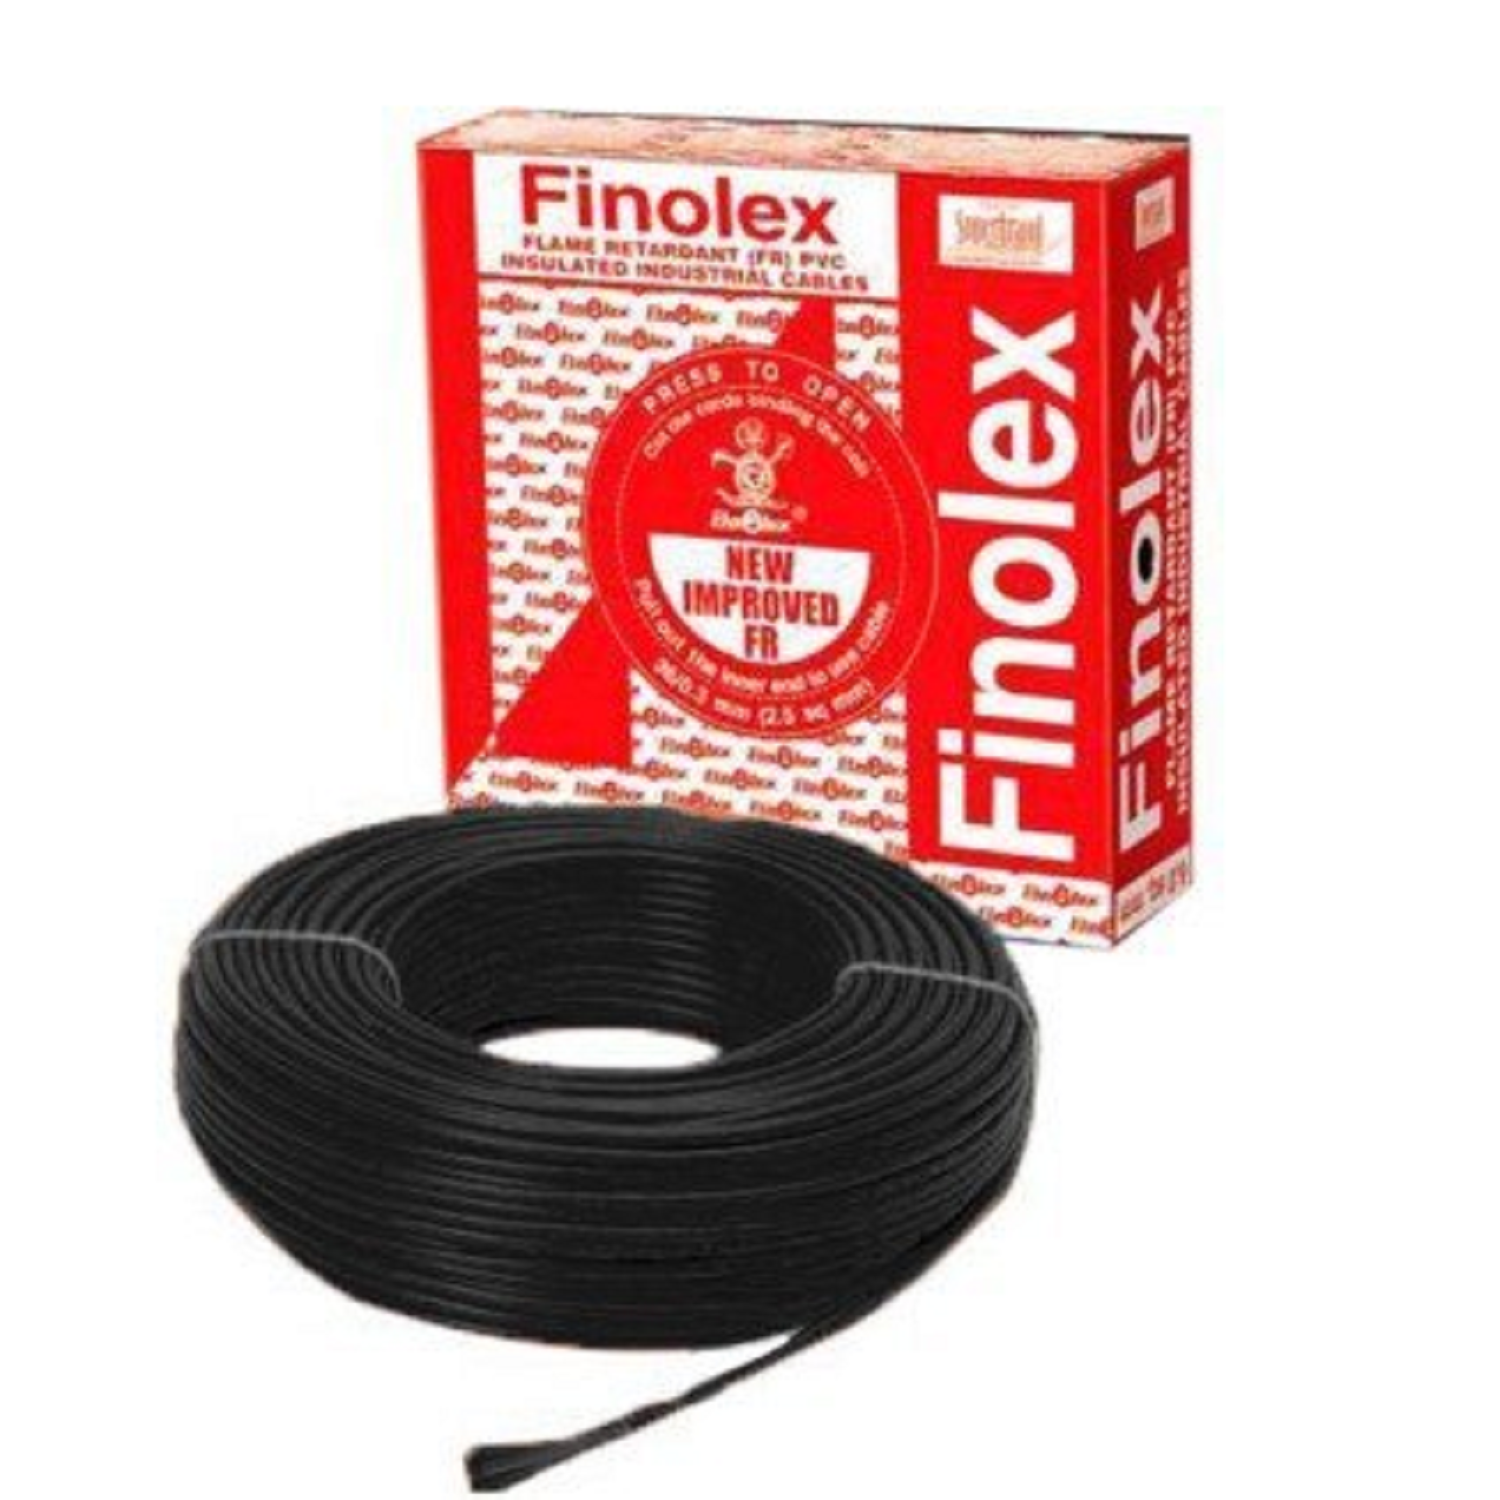 1.5 Sqmm Finolex FR Single Core Copper Wire (90 Mtr) With PVC Insulated for House 38 Industrial Uses